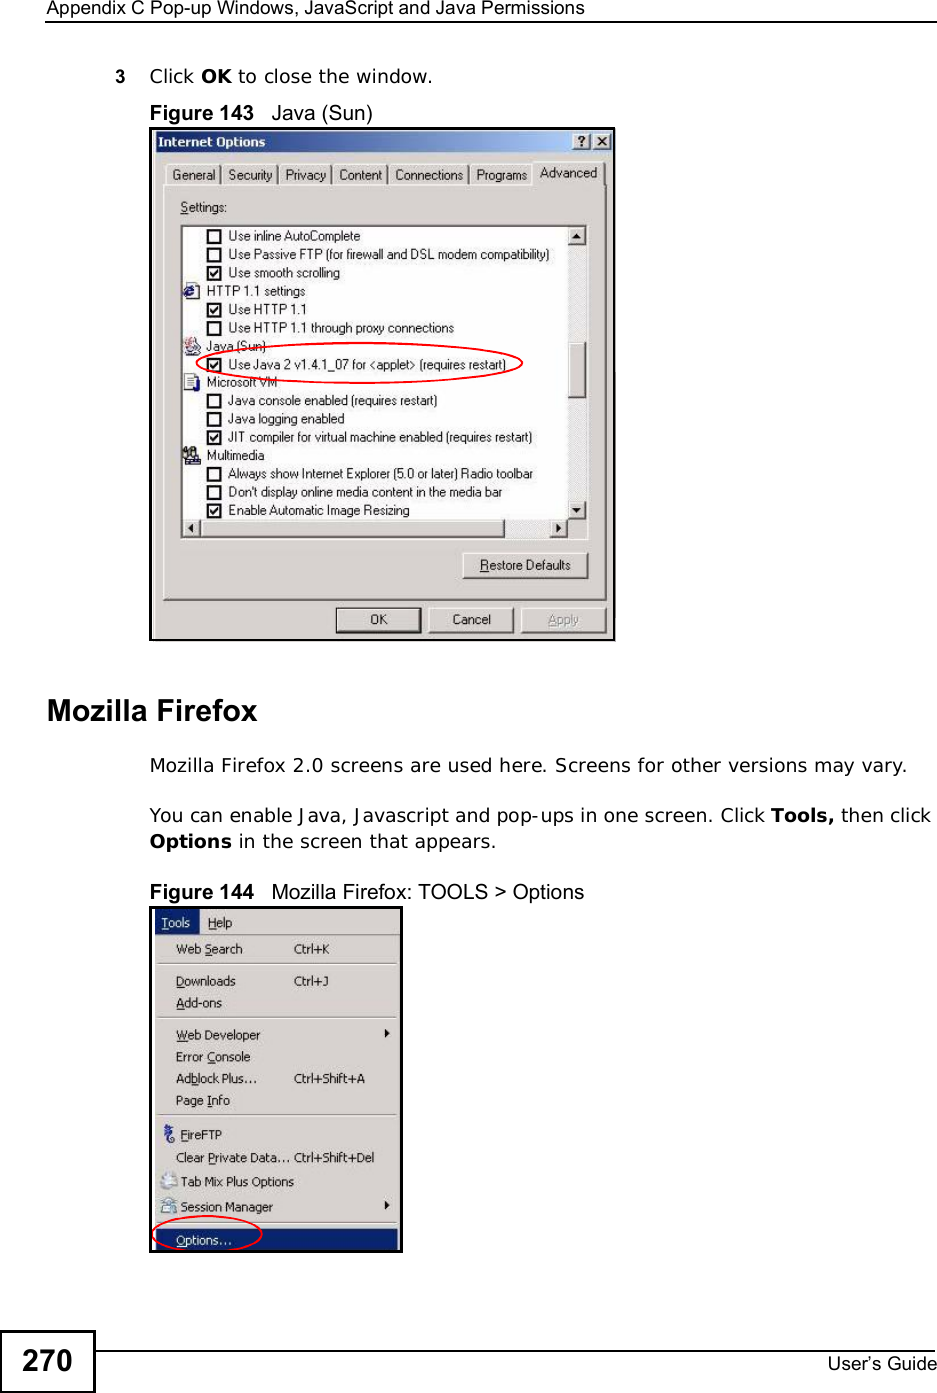 Appendix CPop-up Windows, JavaScript and Java PermissionsUser s Guide2703Click OK to close the window.Figure 143   Java (Sun)Mozilla FirefoxMozilla Firefox 2.0 screens are used here. Screens for other versions may vary. You can enable Java, Javascript and pop-ups in one screen. Click Tools, then click Options in the screen that appears.Figure 144   Mozilla Firefox: TOOLS &gt; Options